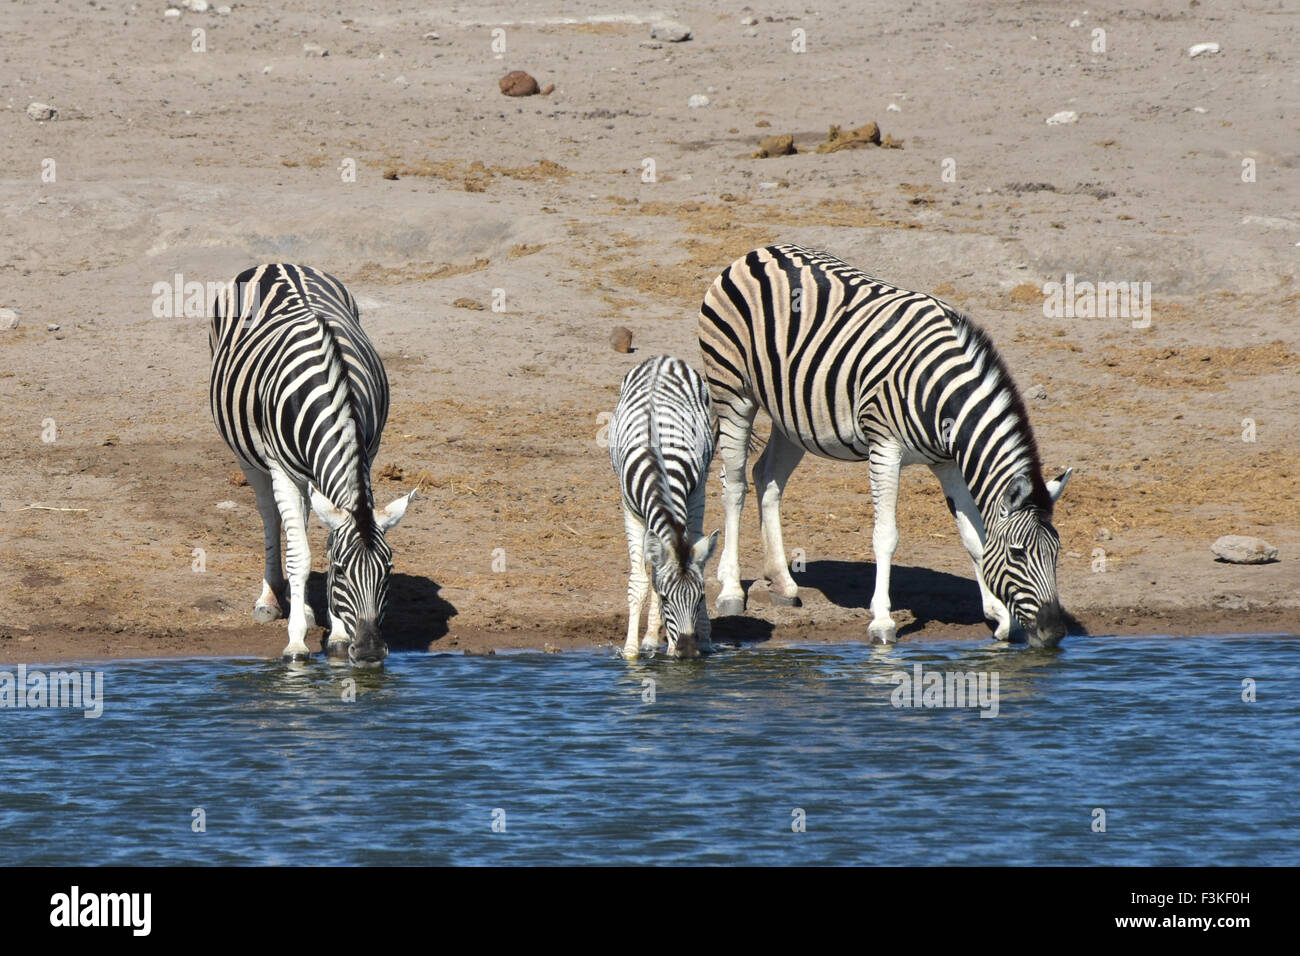 Zebras drinking at a water hole in the wild in Etosha National Park, Namibia, Africa. Stock Photo